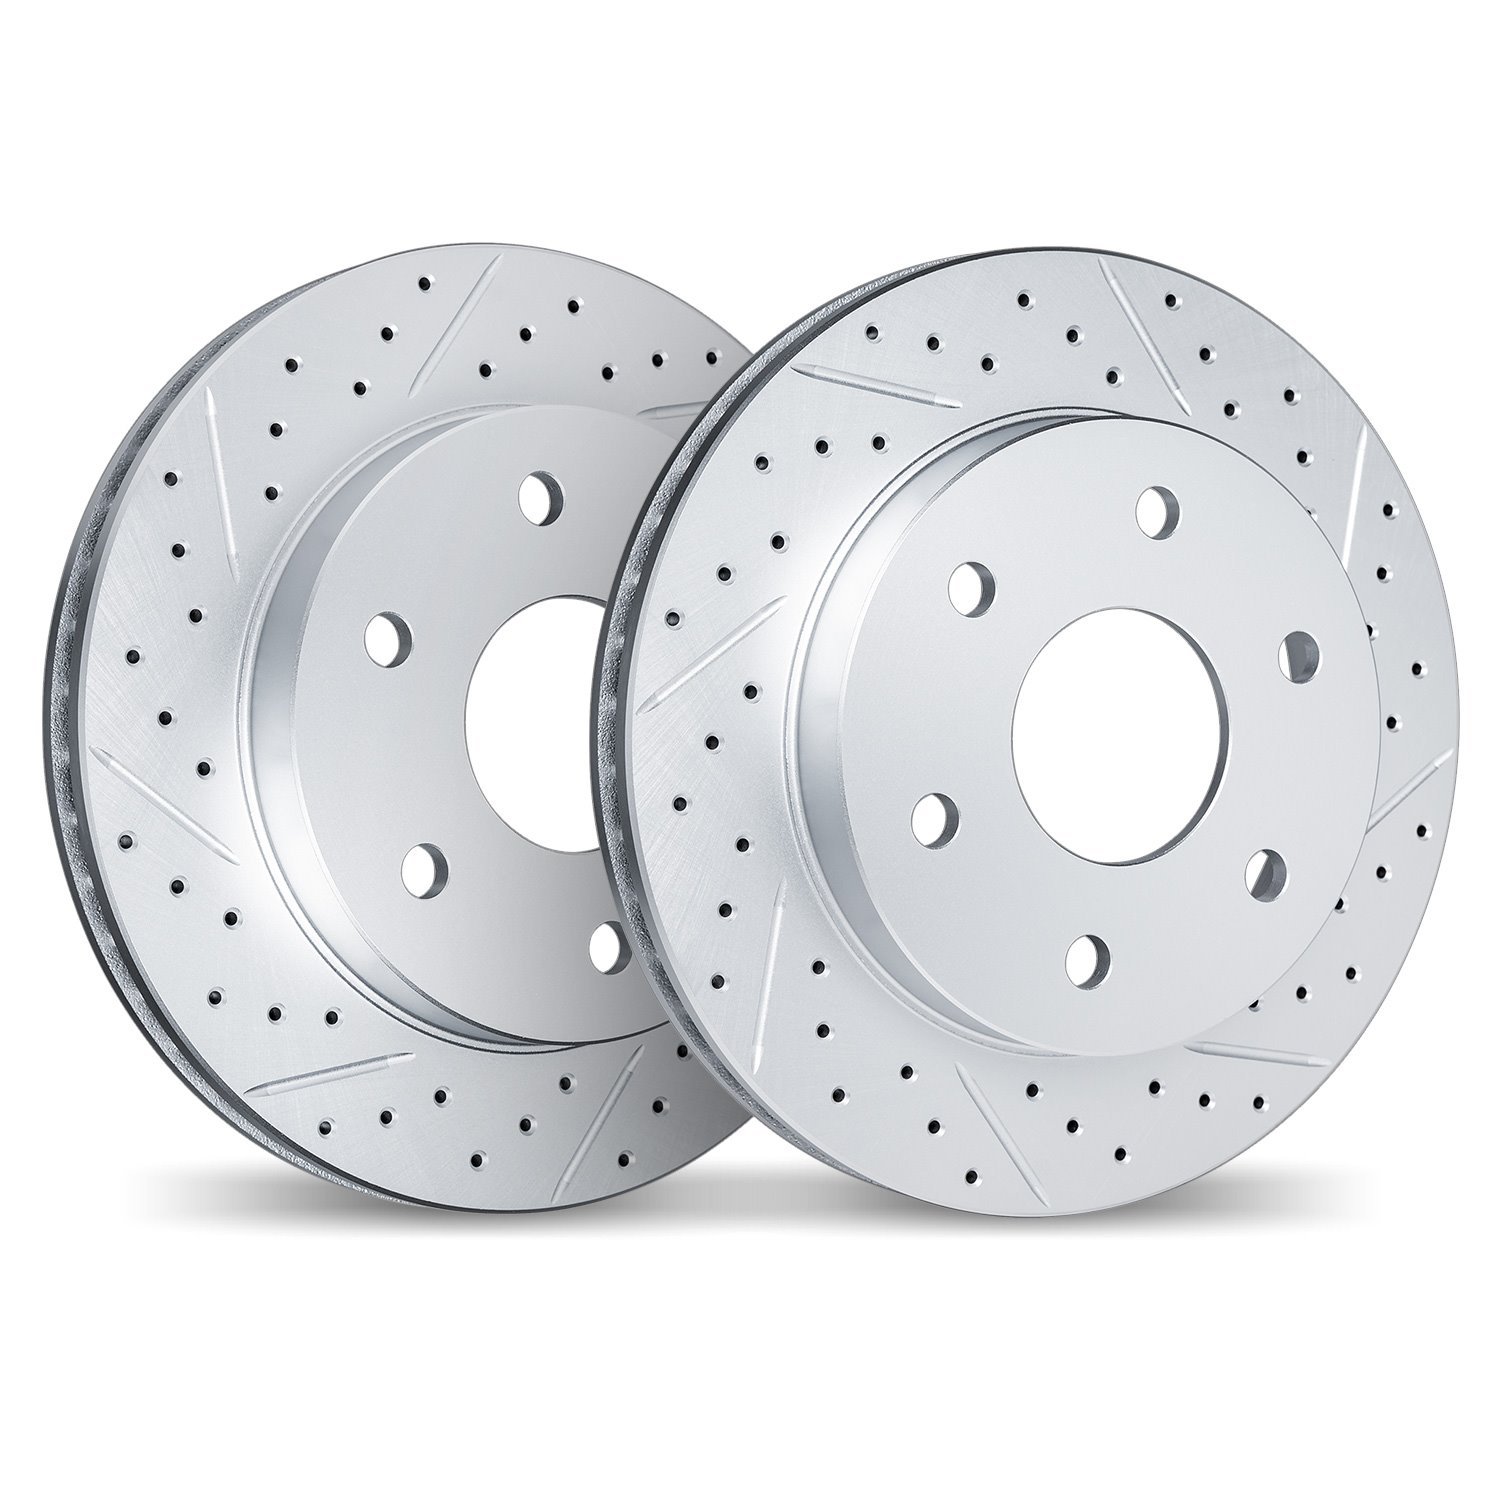 2002-93000 Geoperformance Drilled/Slotted Brake Rotors, 2006-2010 GM, Position: Front